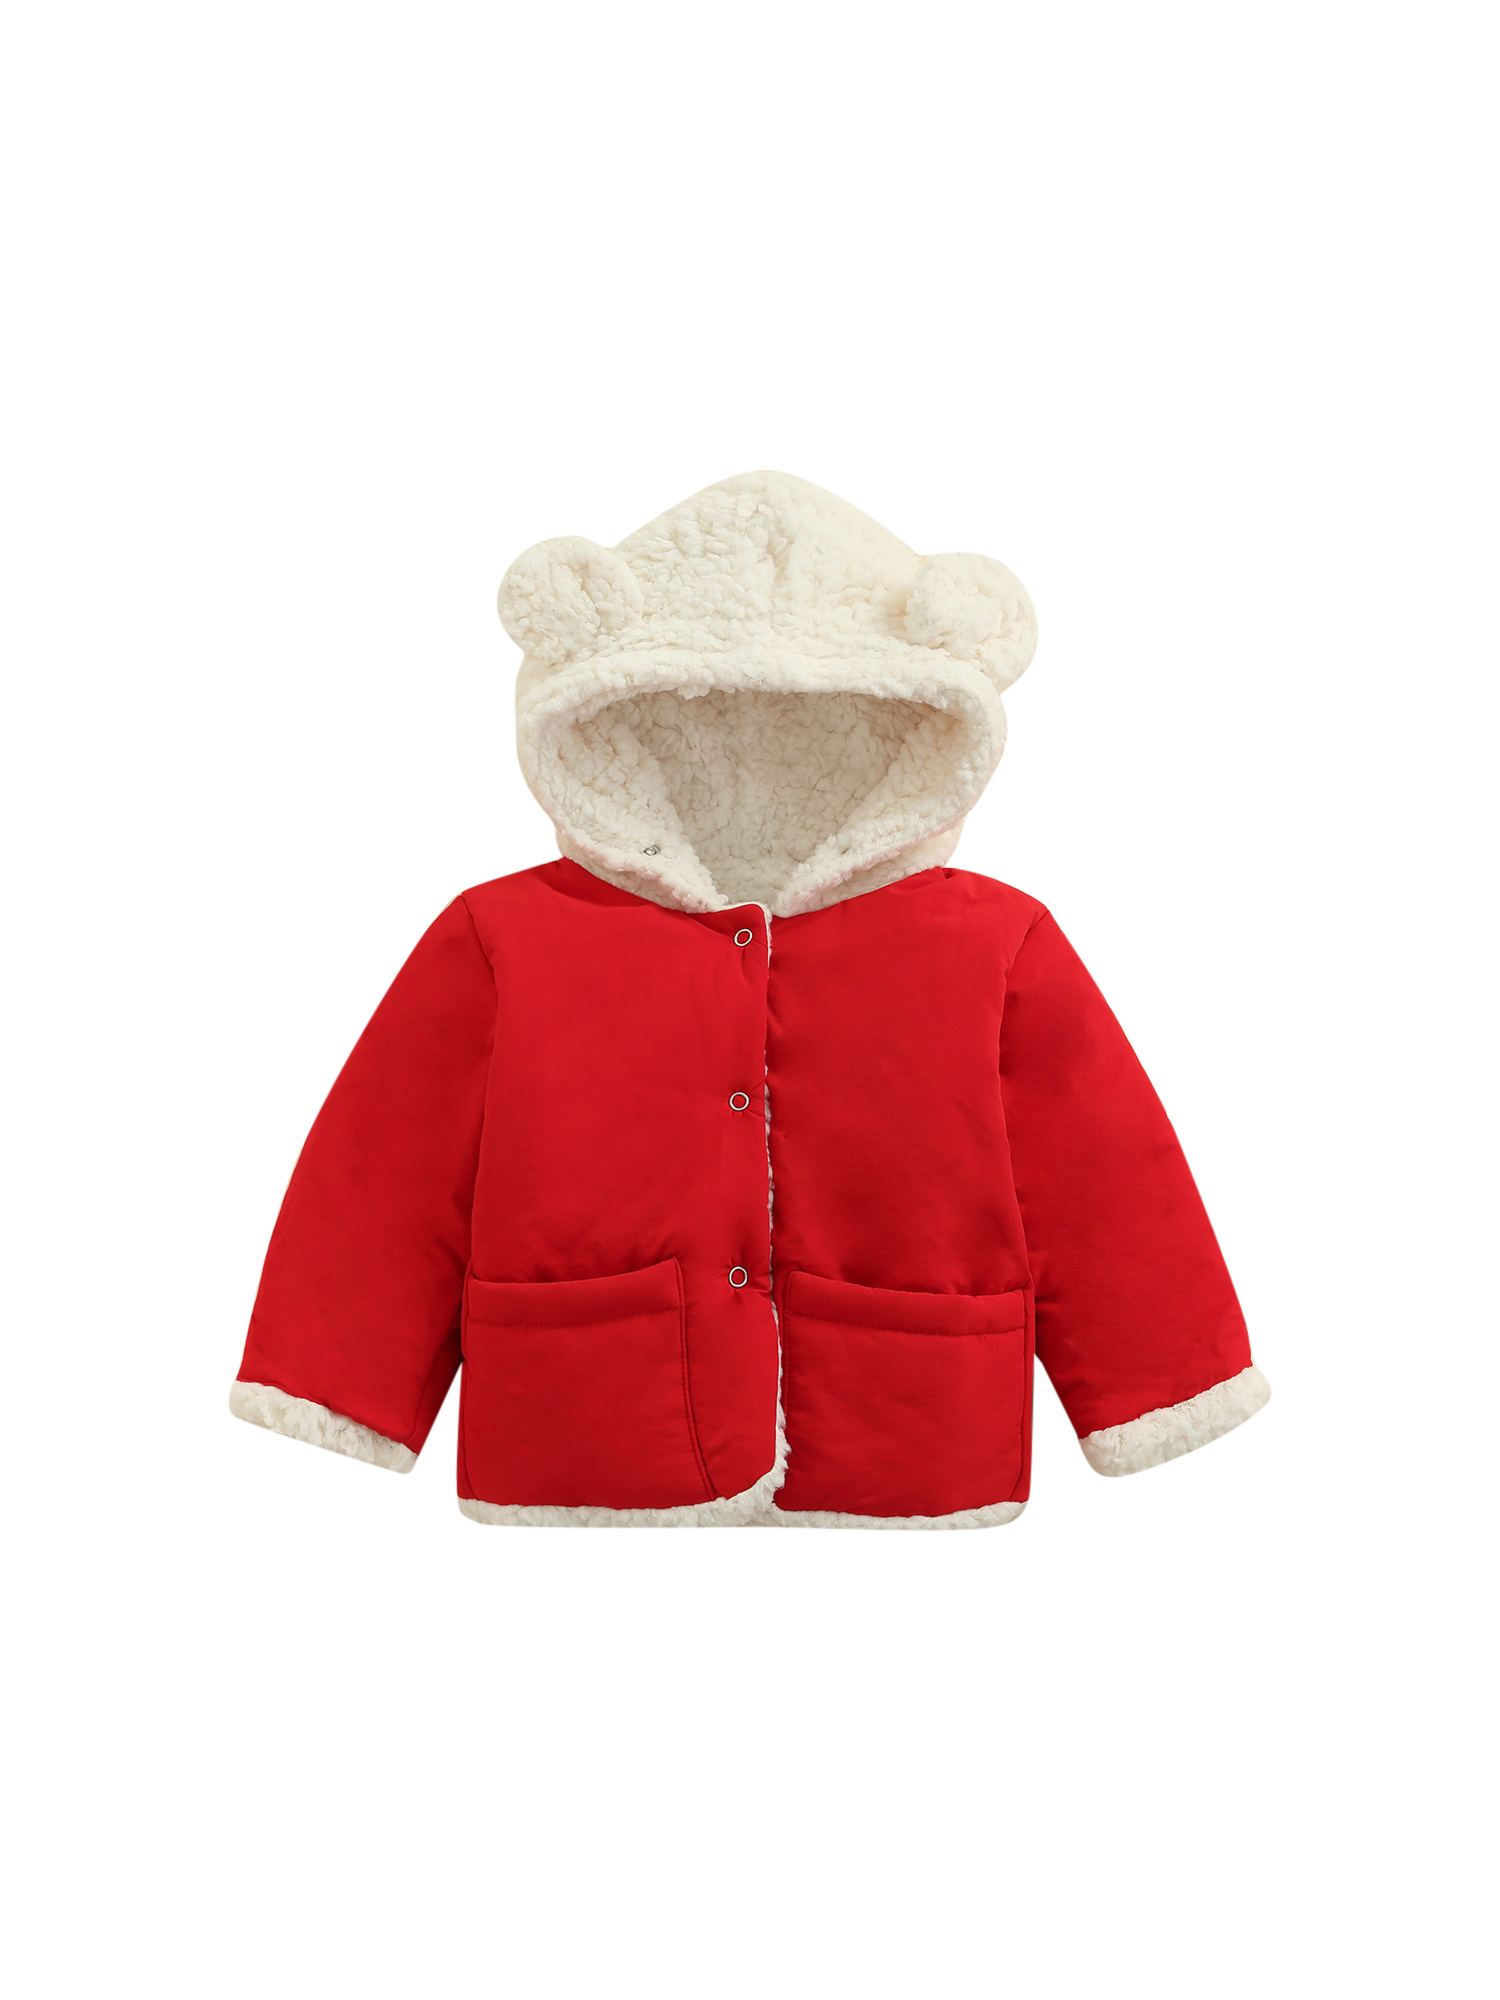 Qiylii Baby Winter Hooded Coat, Long Sleeve Button-down Wadded Jacket - image 1 of 8